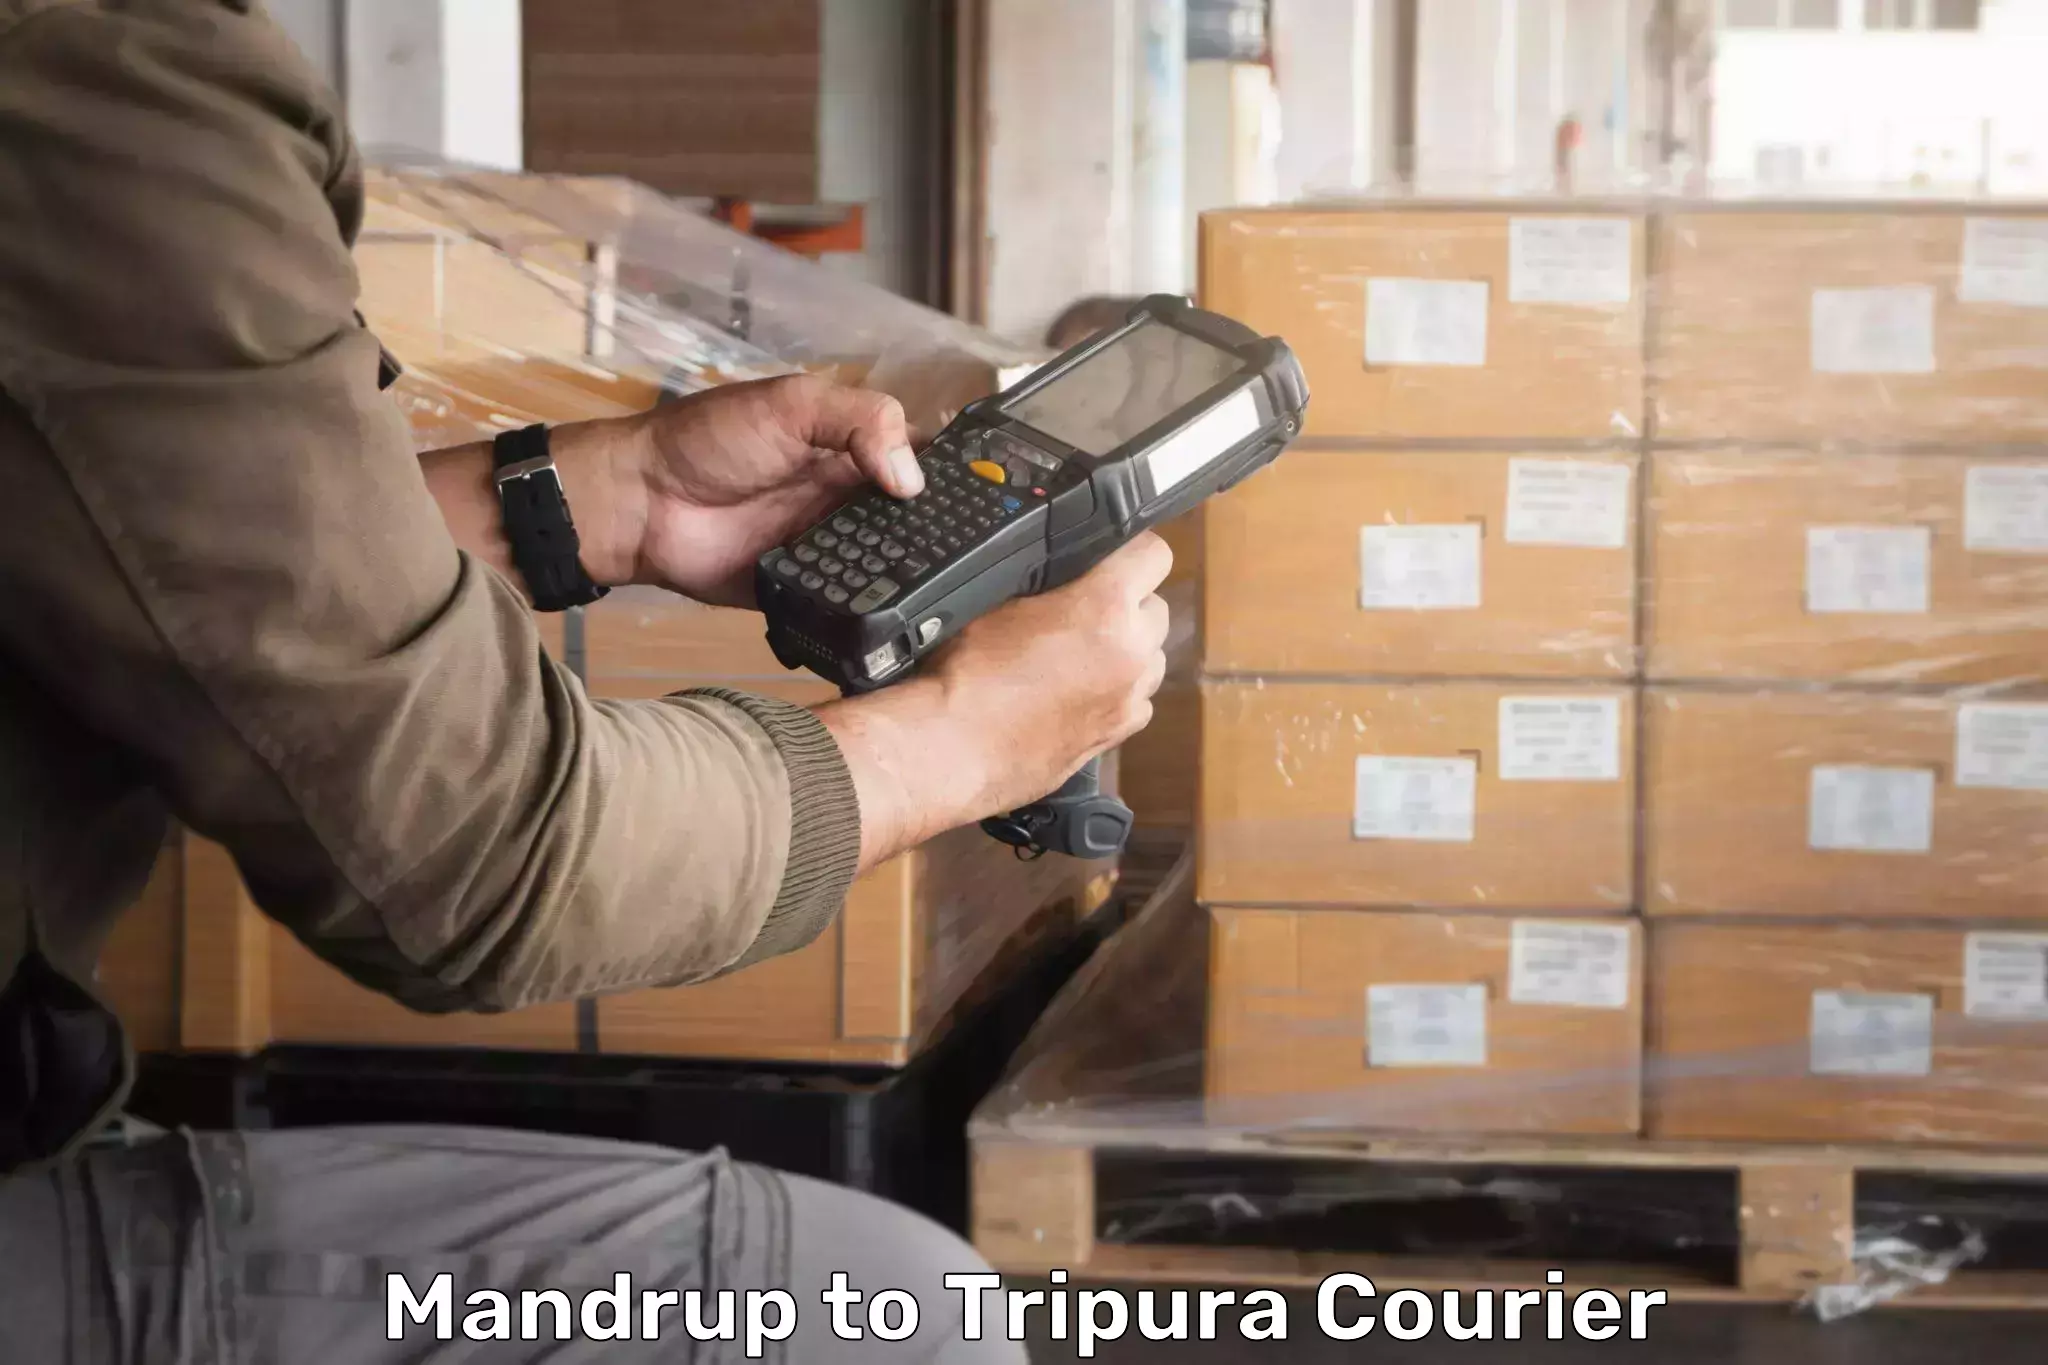 High-speed parcel service Mandrup to Aambasa